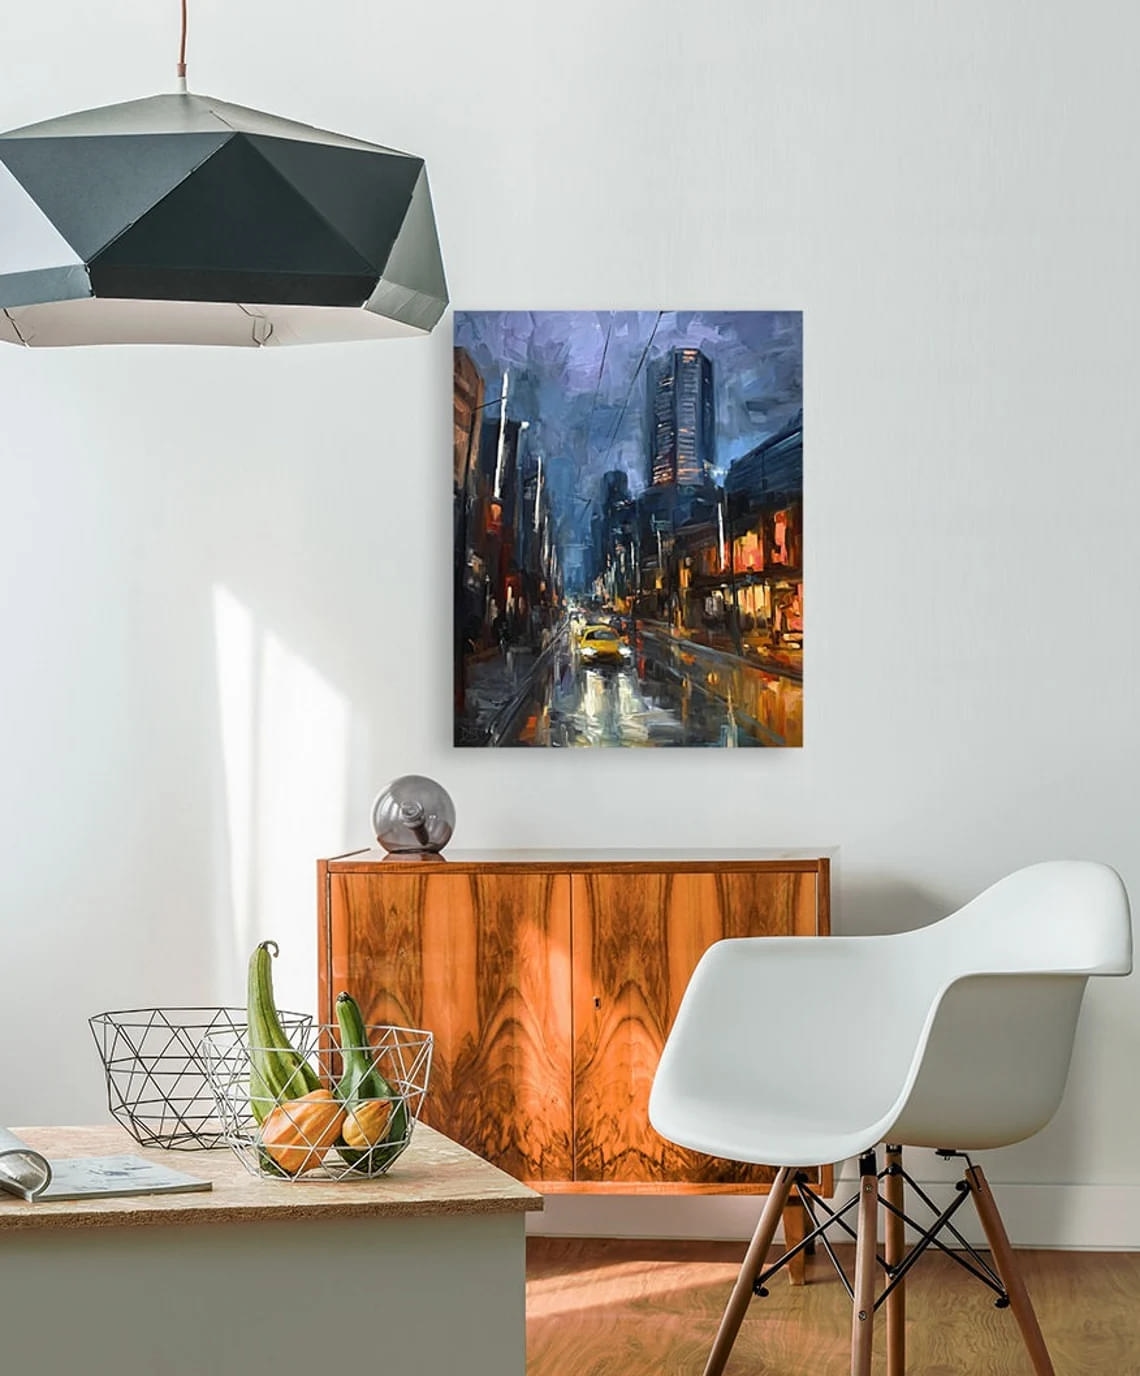 "Welcome Back" - Cityscapes - Original Painting Sample on Wall